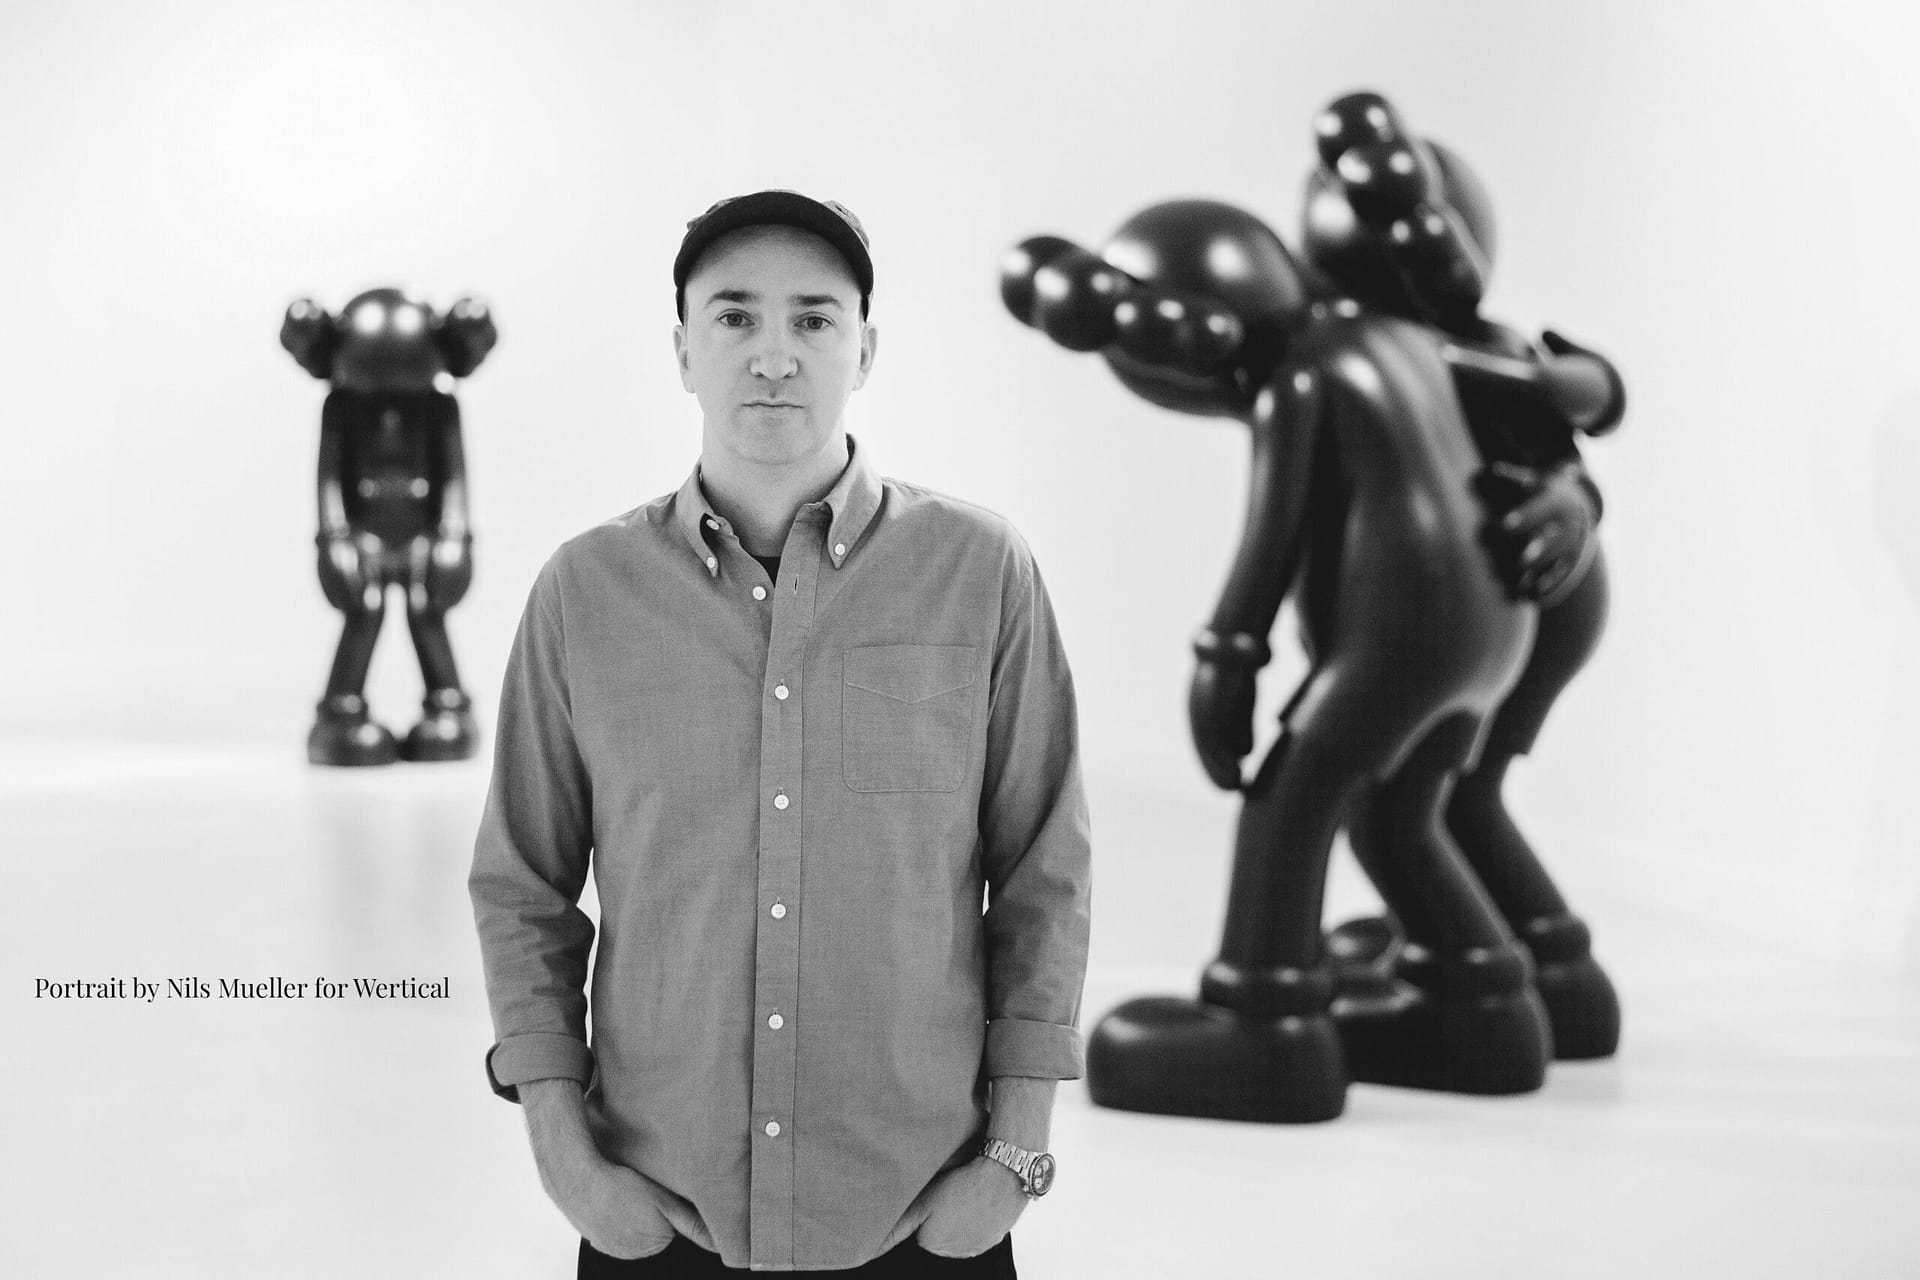 KAWS To Receive Clio Award & Participate in Q&A at Brooklyn Event on October 16th